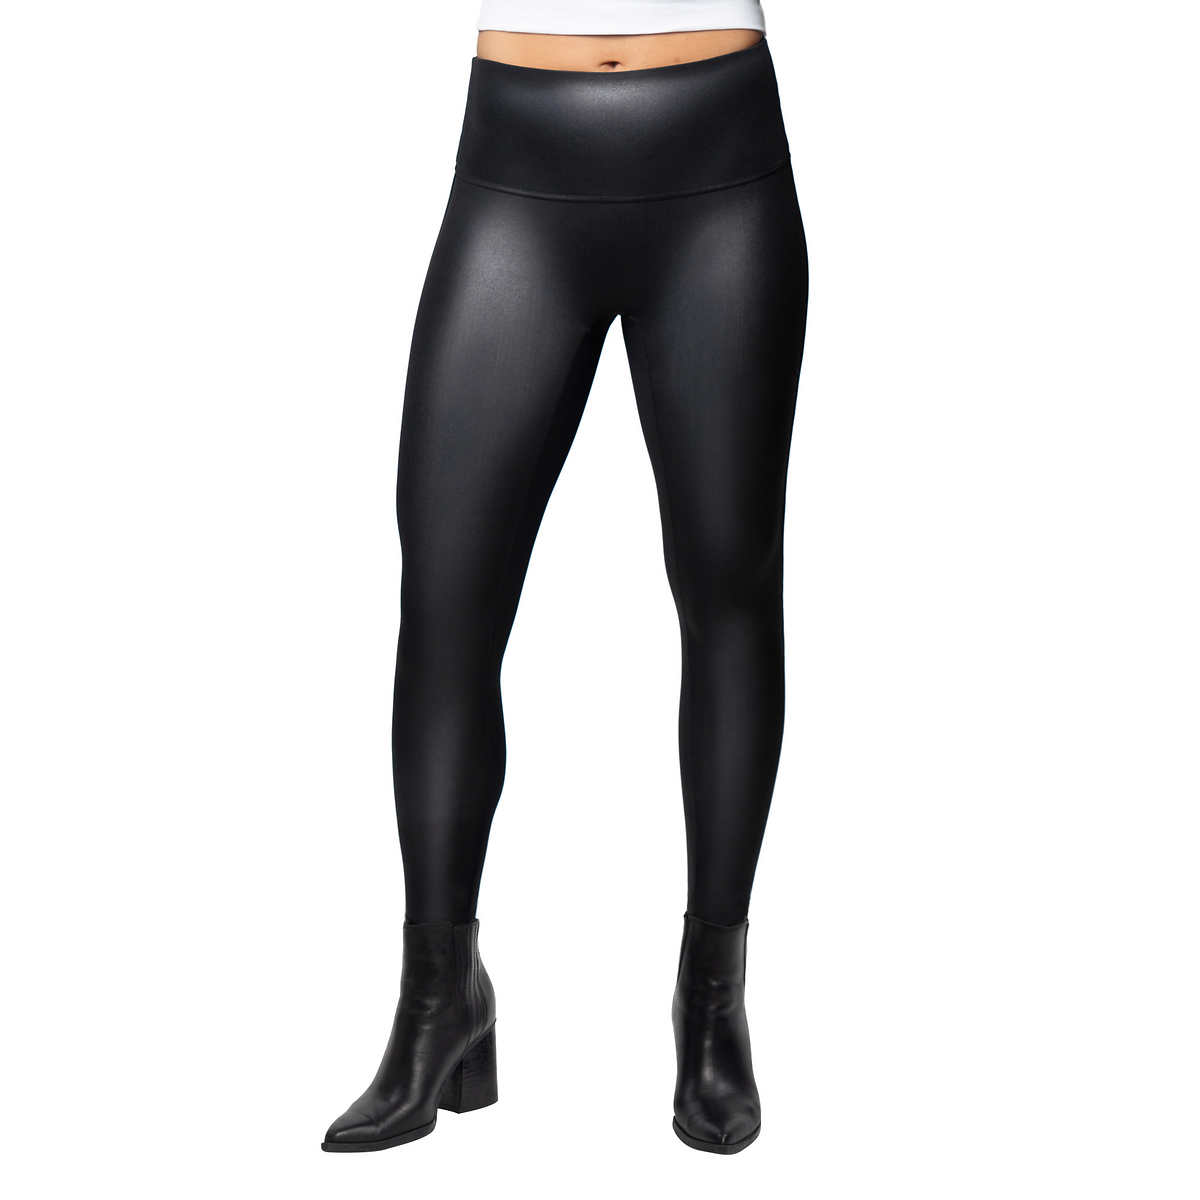 Ice Women's Shiny Stretch Faux Leather Leggings - Real Leather Garments